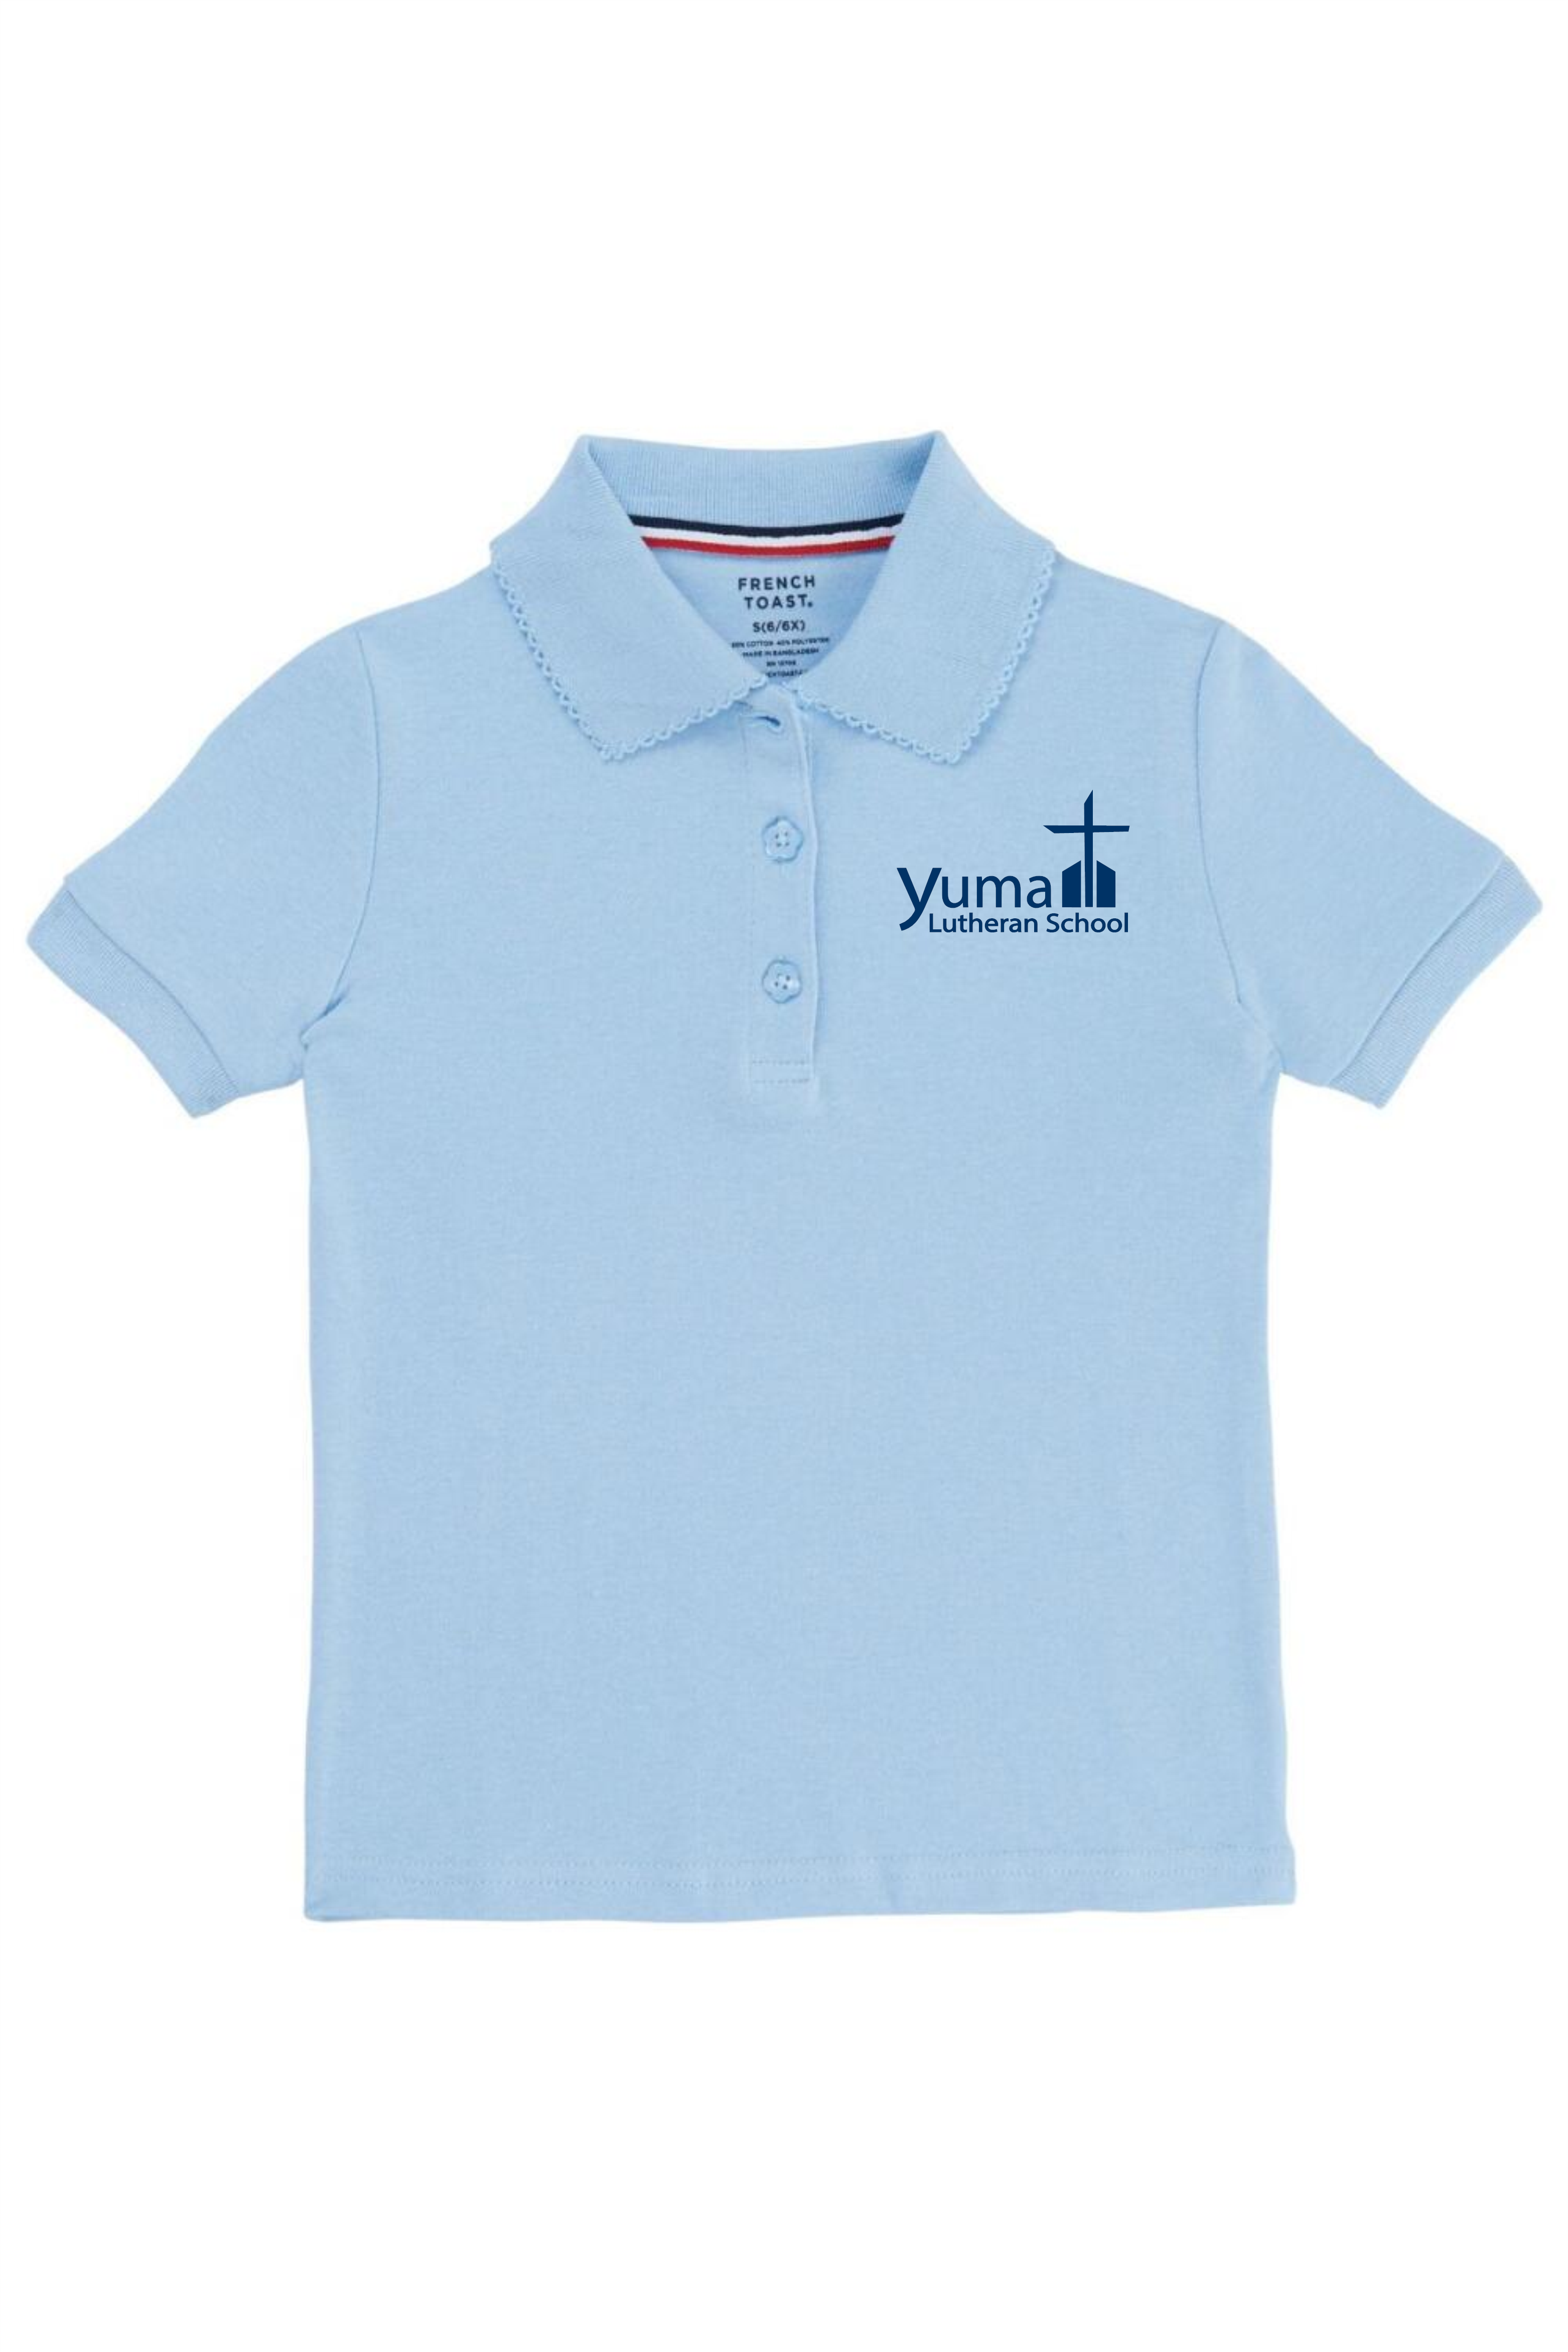 French Toast Girl's Cotton Short Sleeve Polo - YLS (Polo Size: 4T, French Toast Polo Color: Lt Blue - YLS)